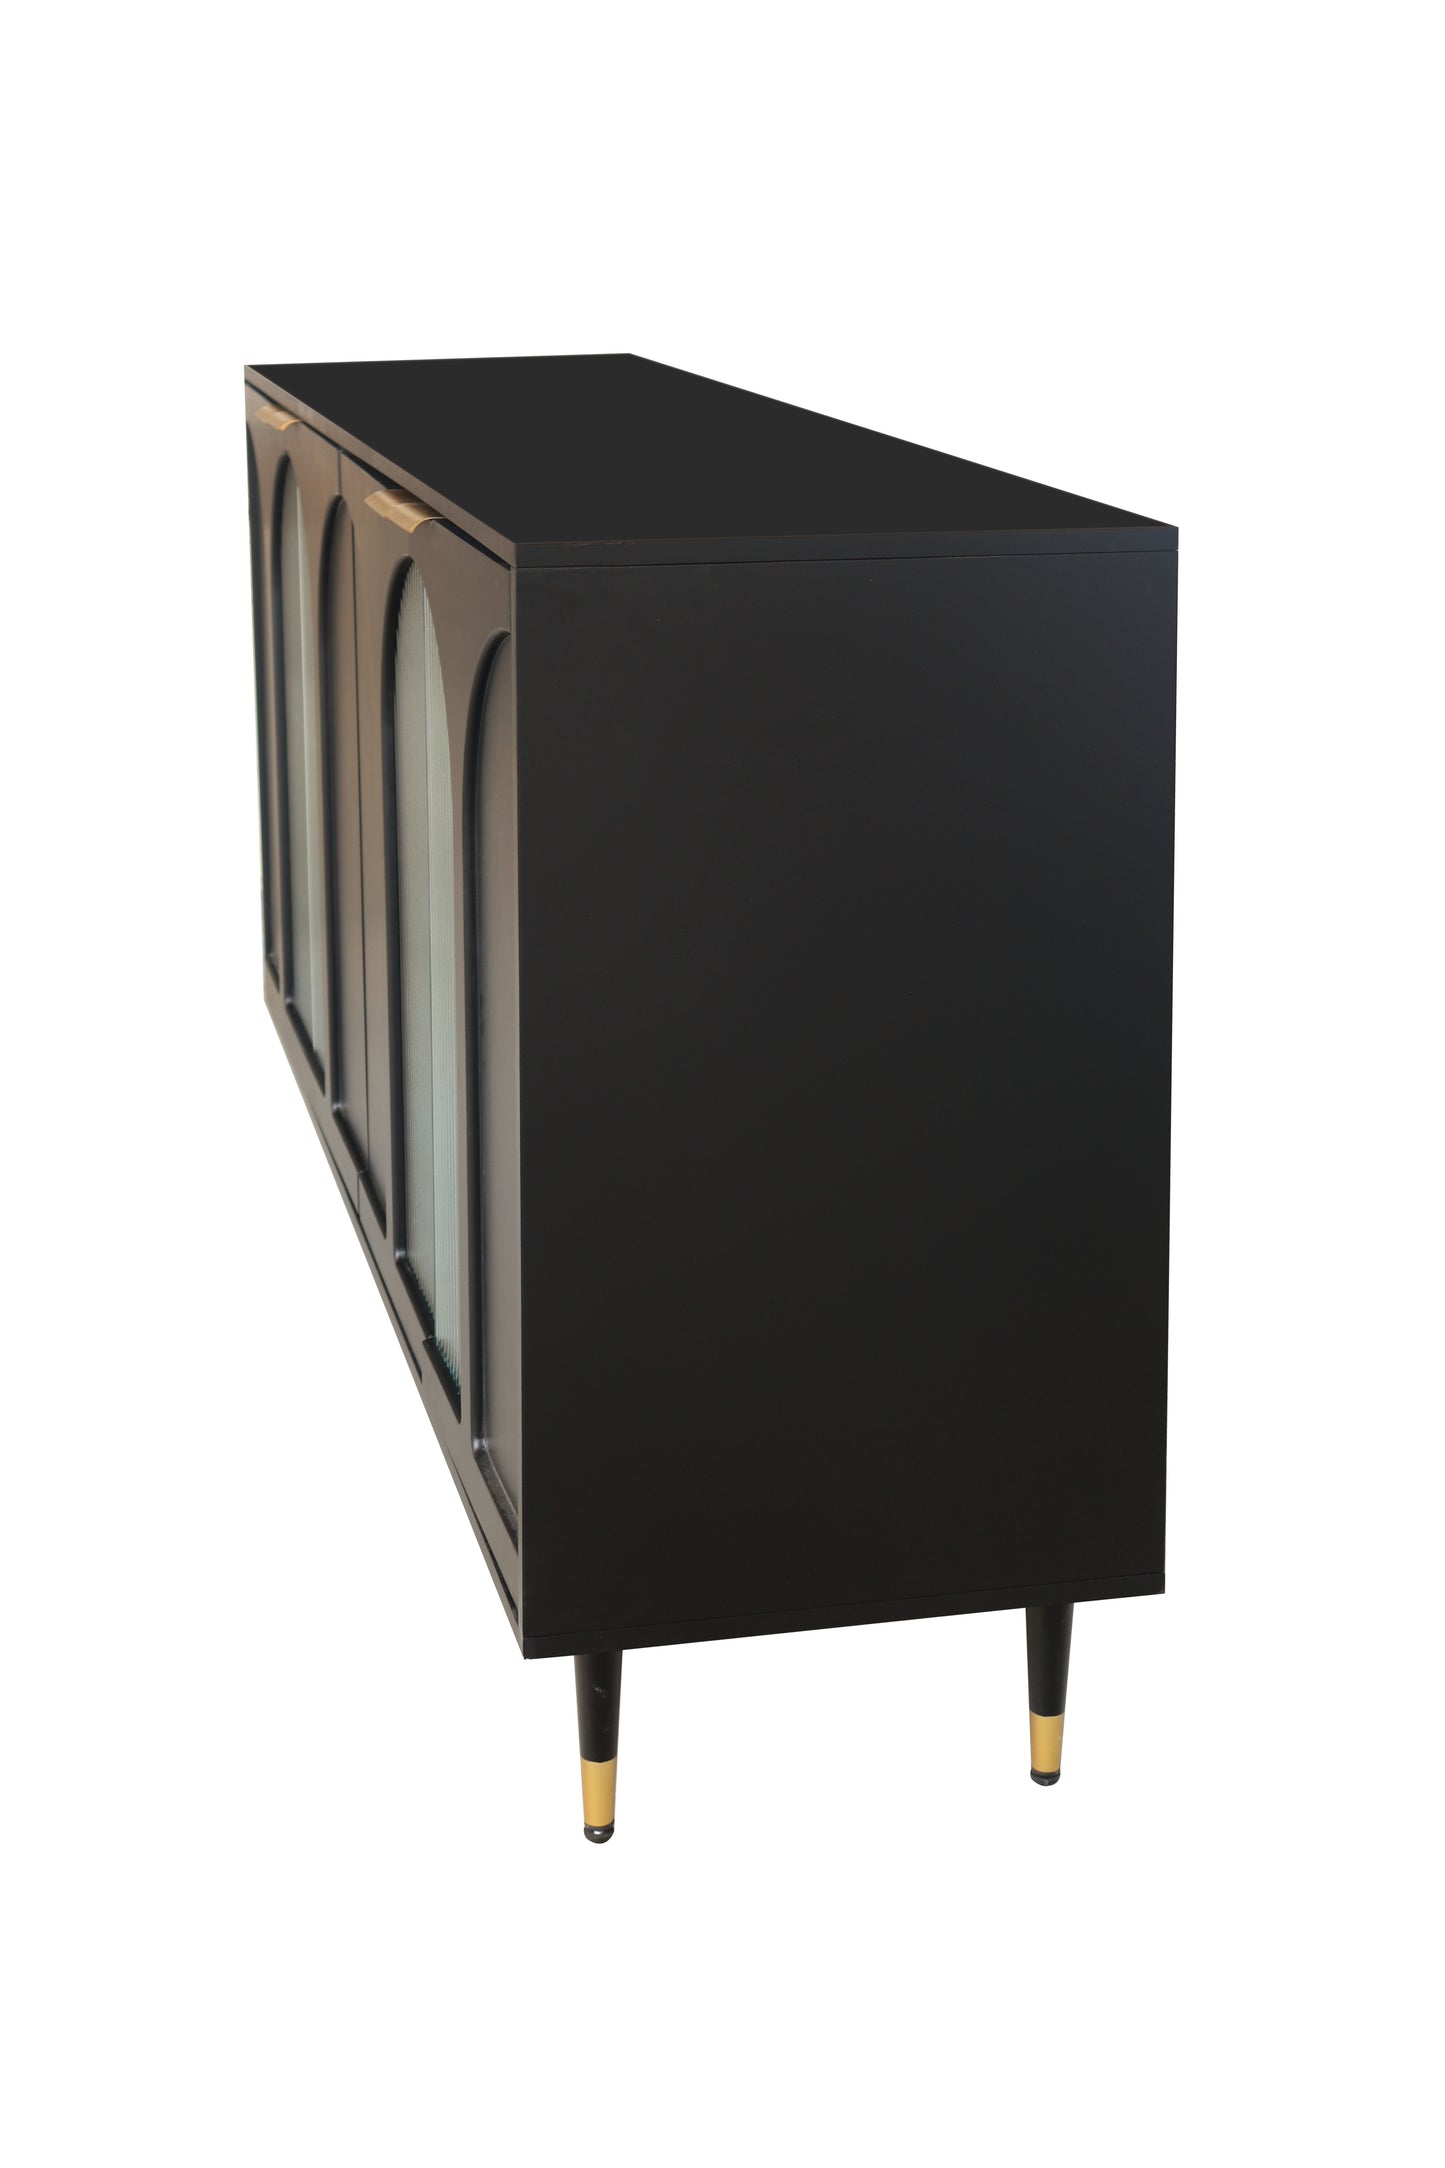 Luxurious Space Saver: Black Lacquered Wooden Accent Cabinet with Quadruple Glass Panelling, Sideboard, Buffet and Server for Enhanced Storage and Display in Living Areas, Entryways, and Culinary Spaces.